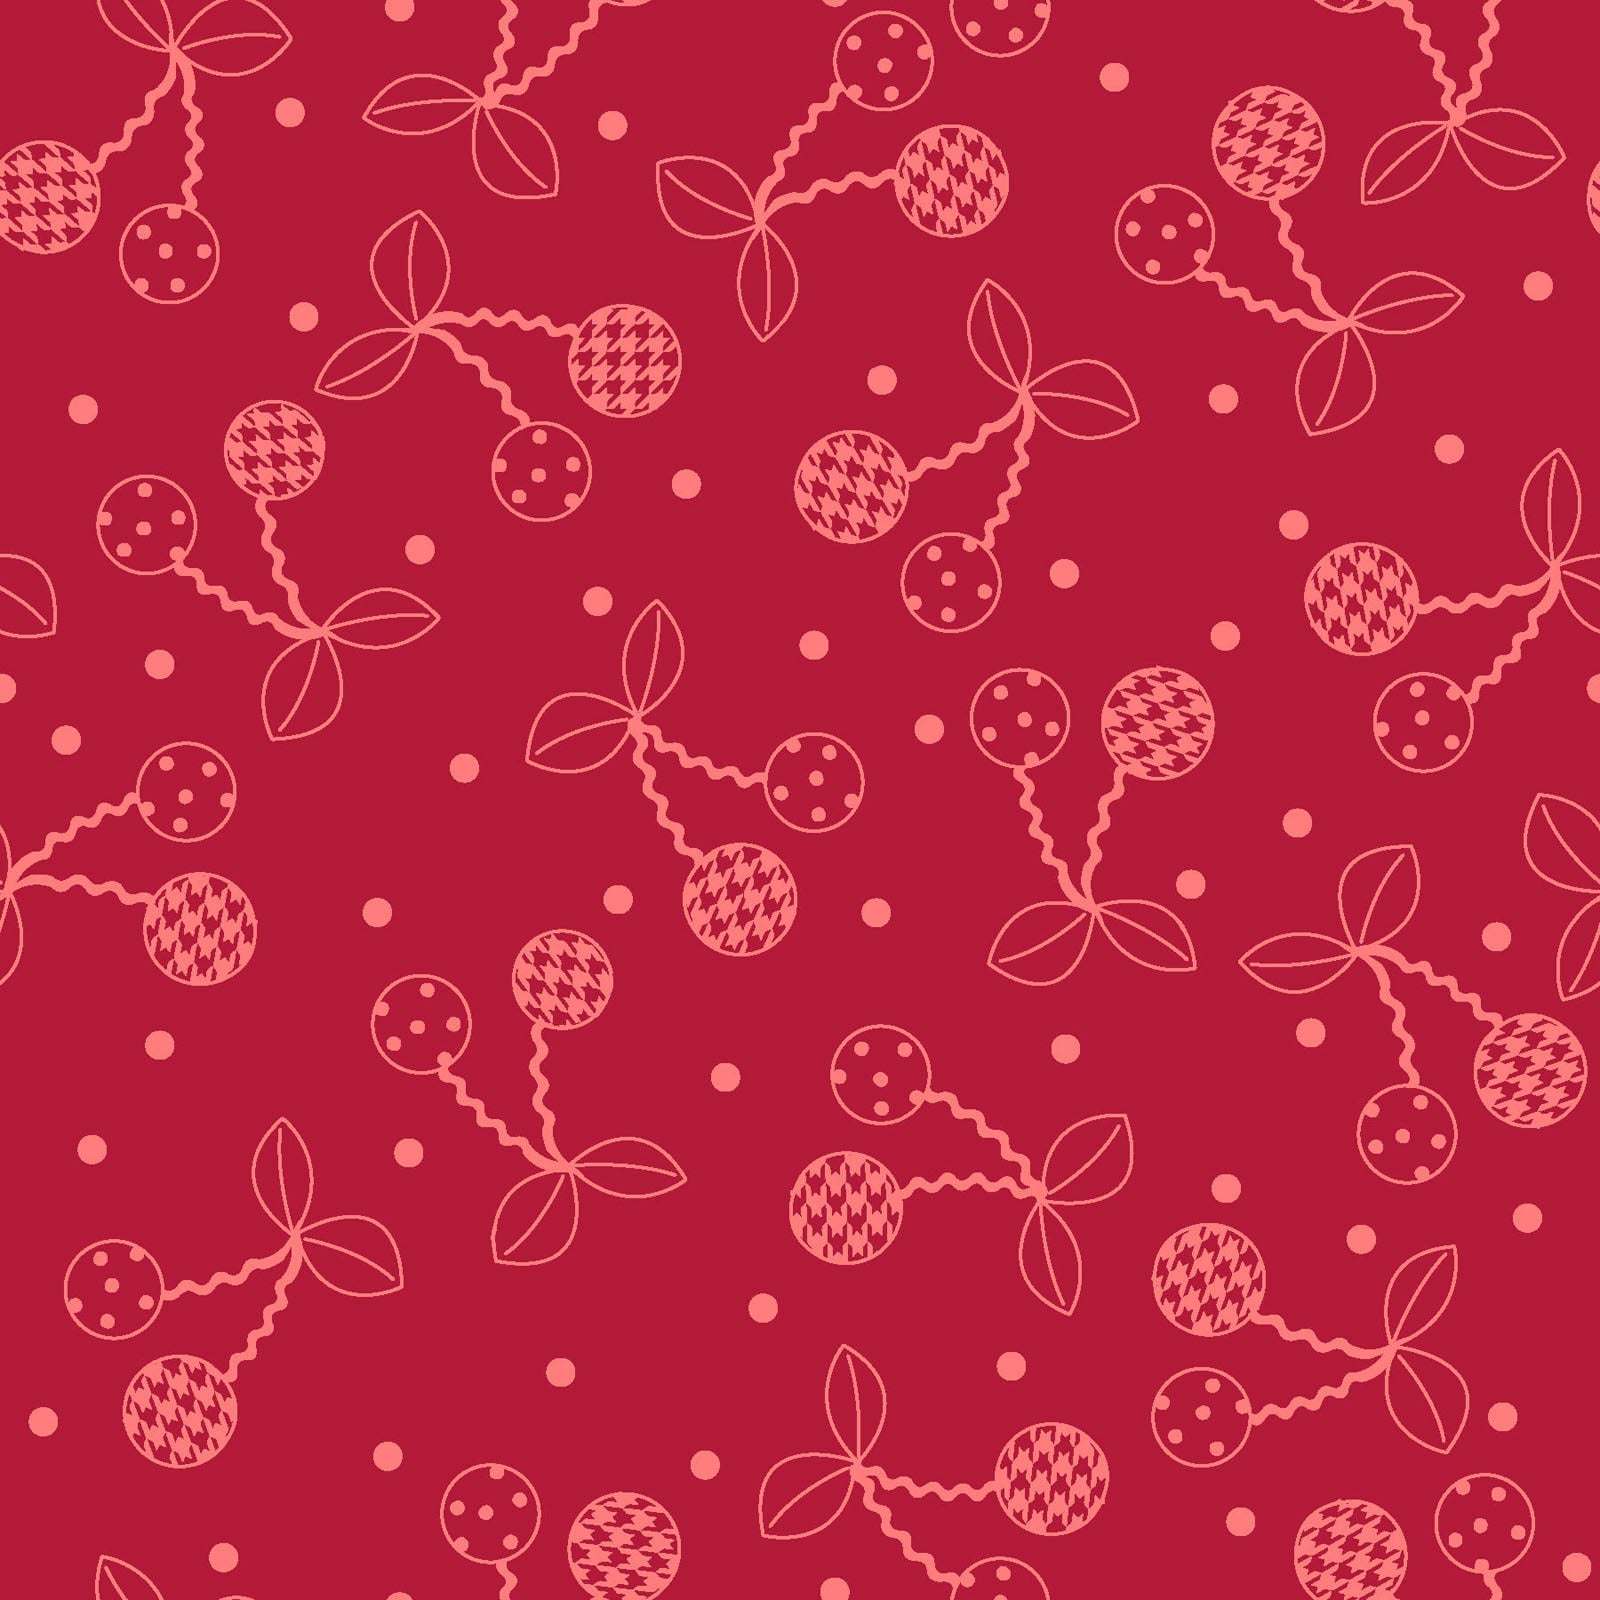 Cherries Red on Red (MAS8245-RR) is part of the Kimberbell Basics line designed by Kim Christopherson for Maywood Studio. This fabric features red tone on tone cherries, adding a whimsical touch that isn't overpowering in projects.